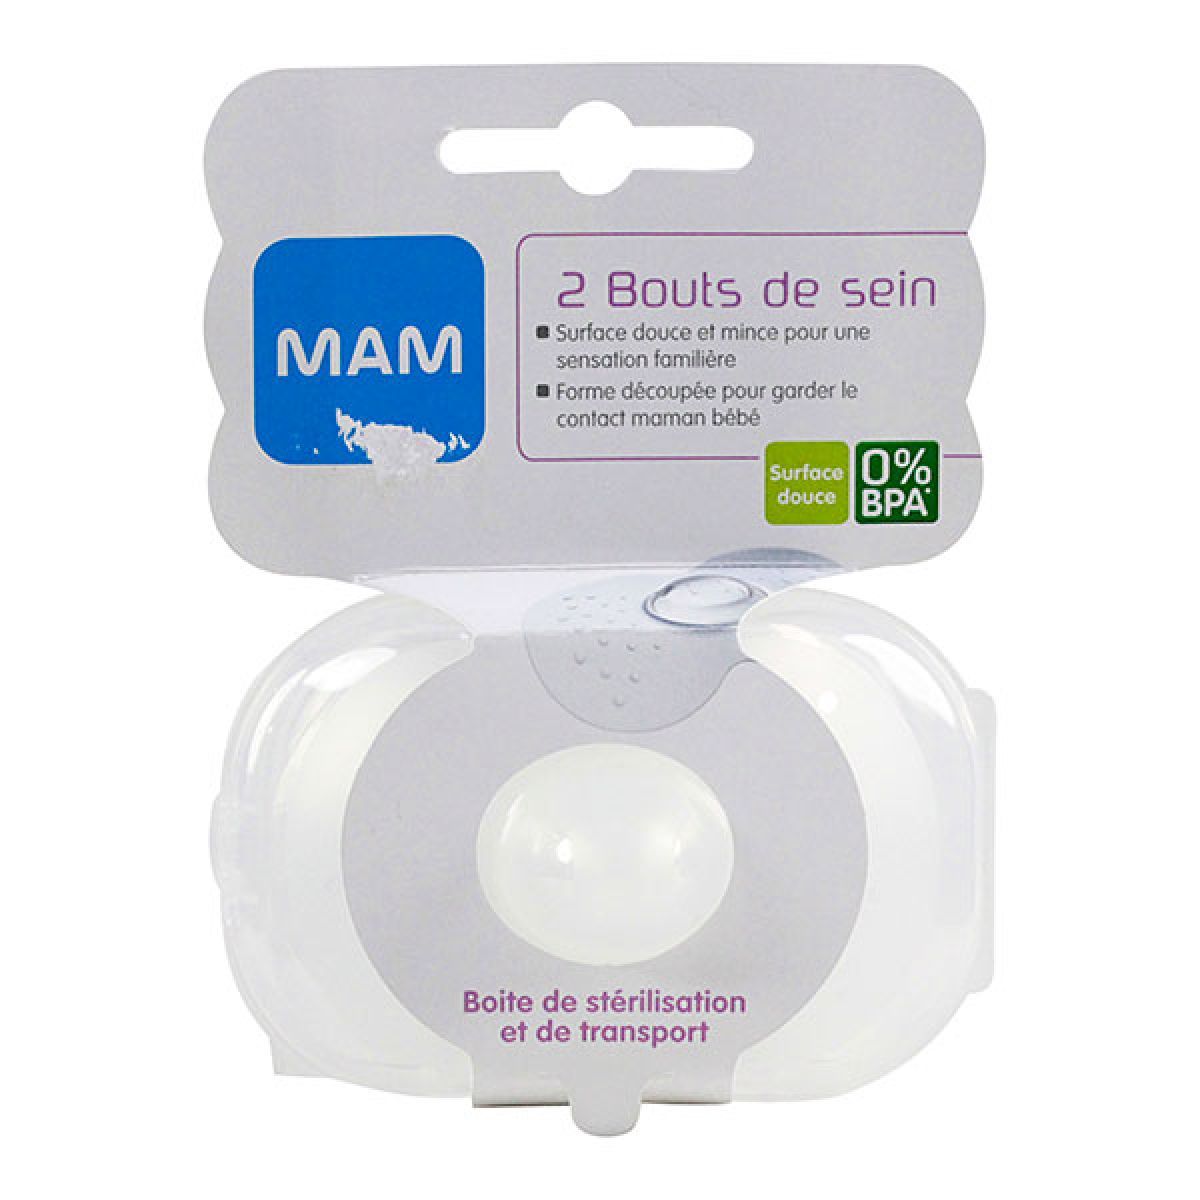 Mam Bouts de sein taille 2-TAILLE S